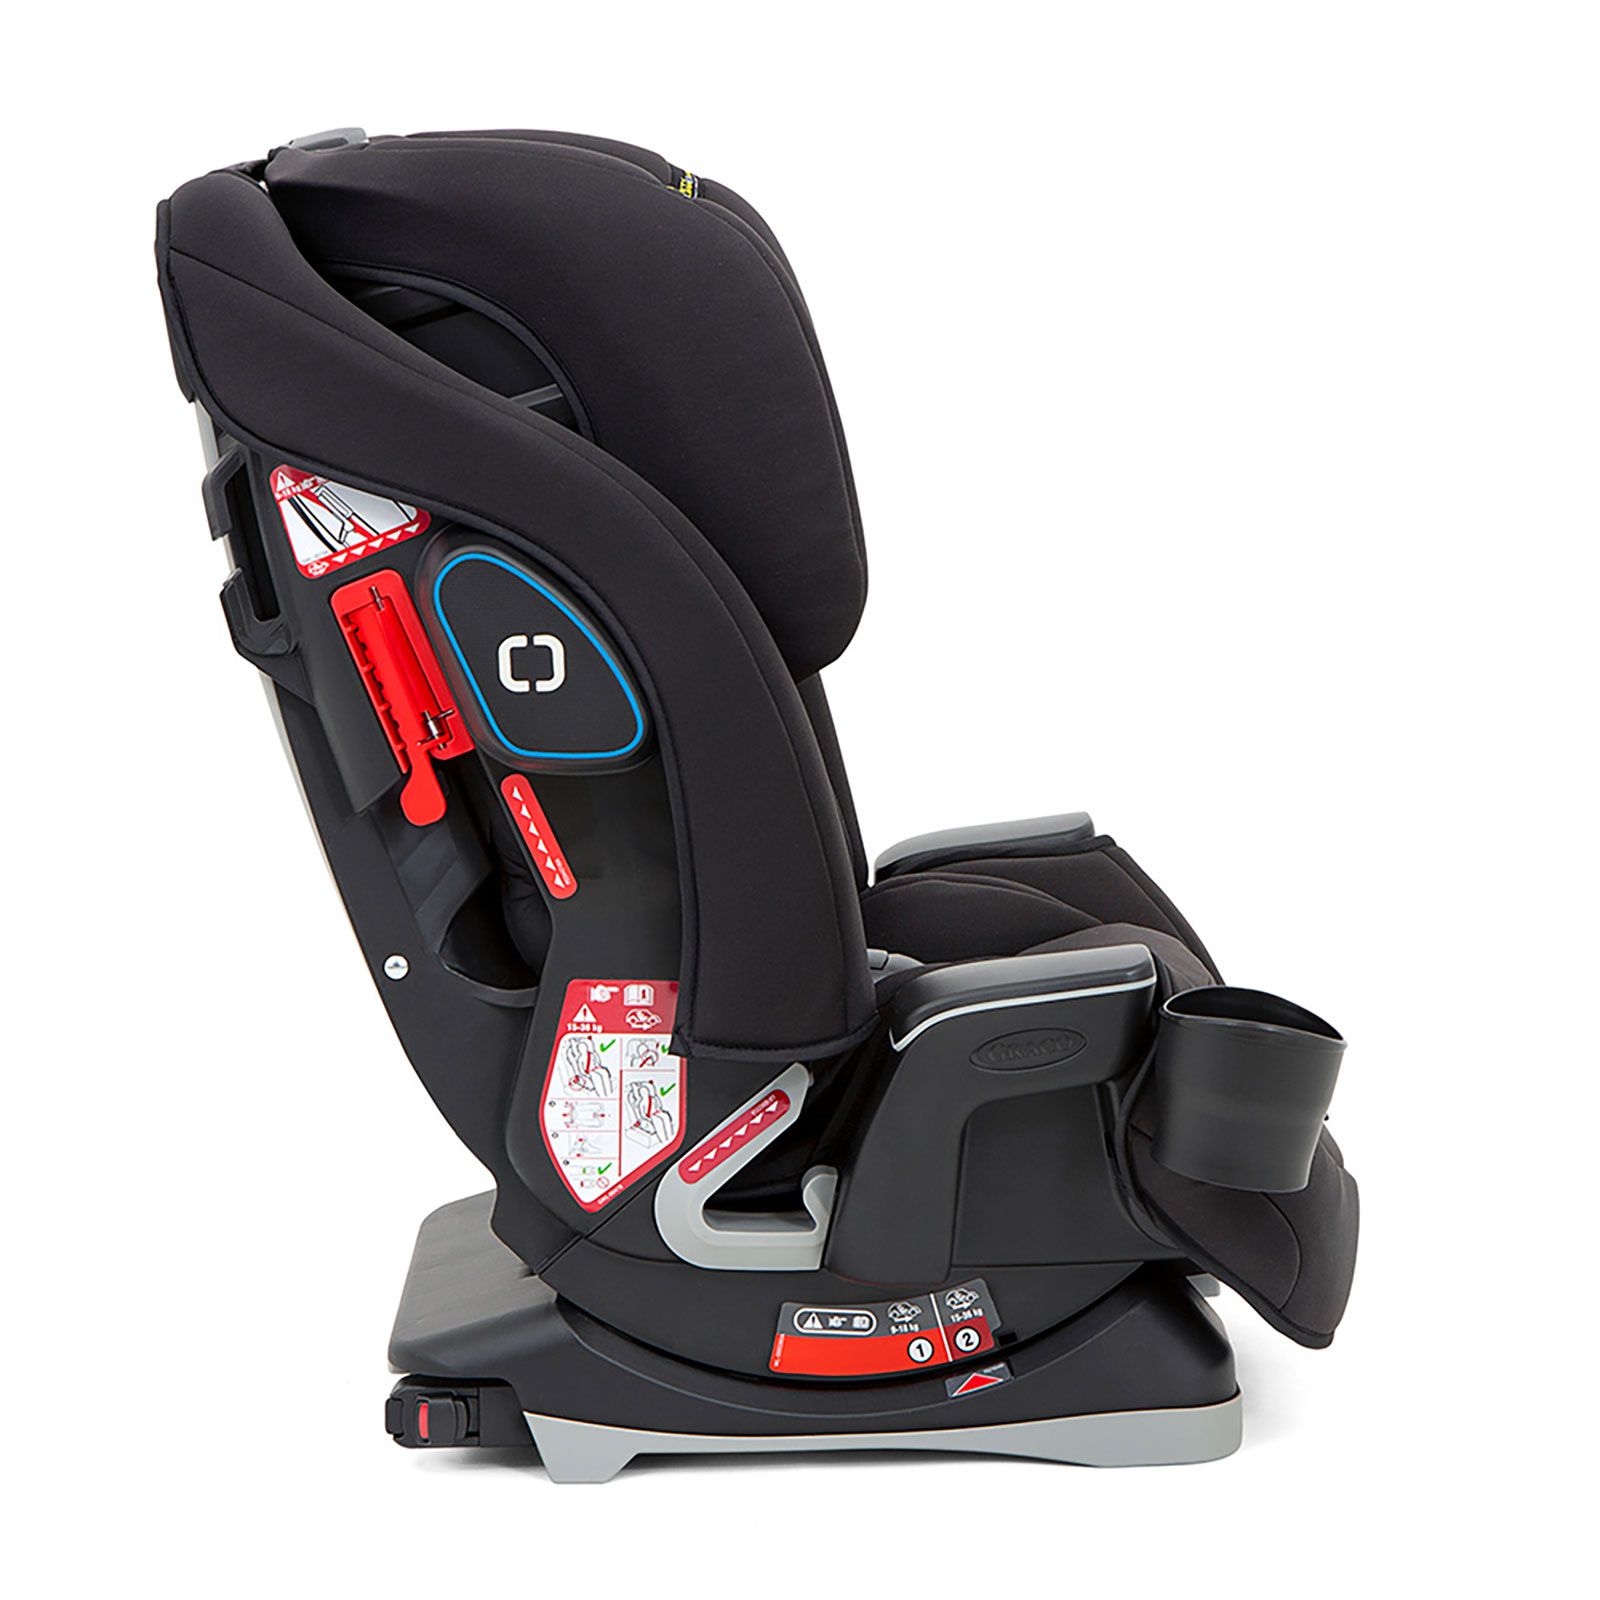 Joie Bold Group 1/2/3 ISOFIX Car Seat - Slate (9 Months-12 Years)